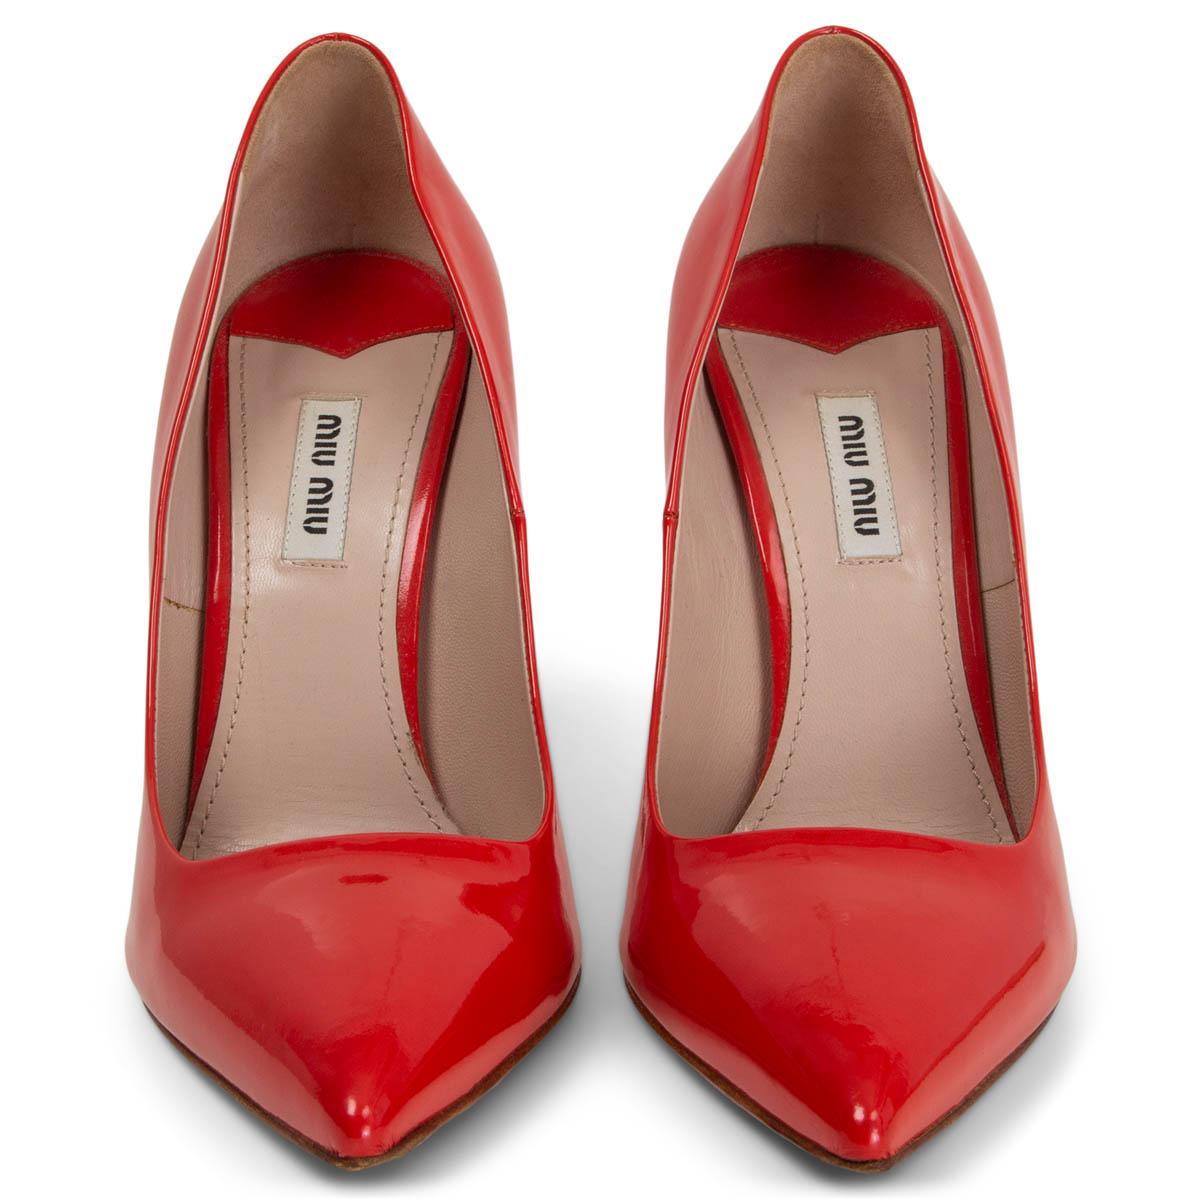 100% authentic Miu Miu pointed-toe pumps in red patent leather with embellished silver-tone glitter sole. Have been worn and are in excellent condition. 

Measurements
Imprinted Size	39
Shoe Size	39
Inside Sole	26cm (10.1in)
Width	7.5cm